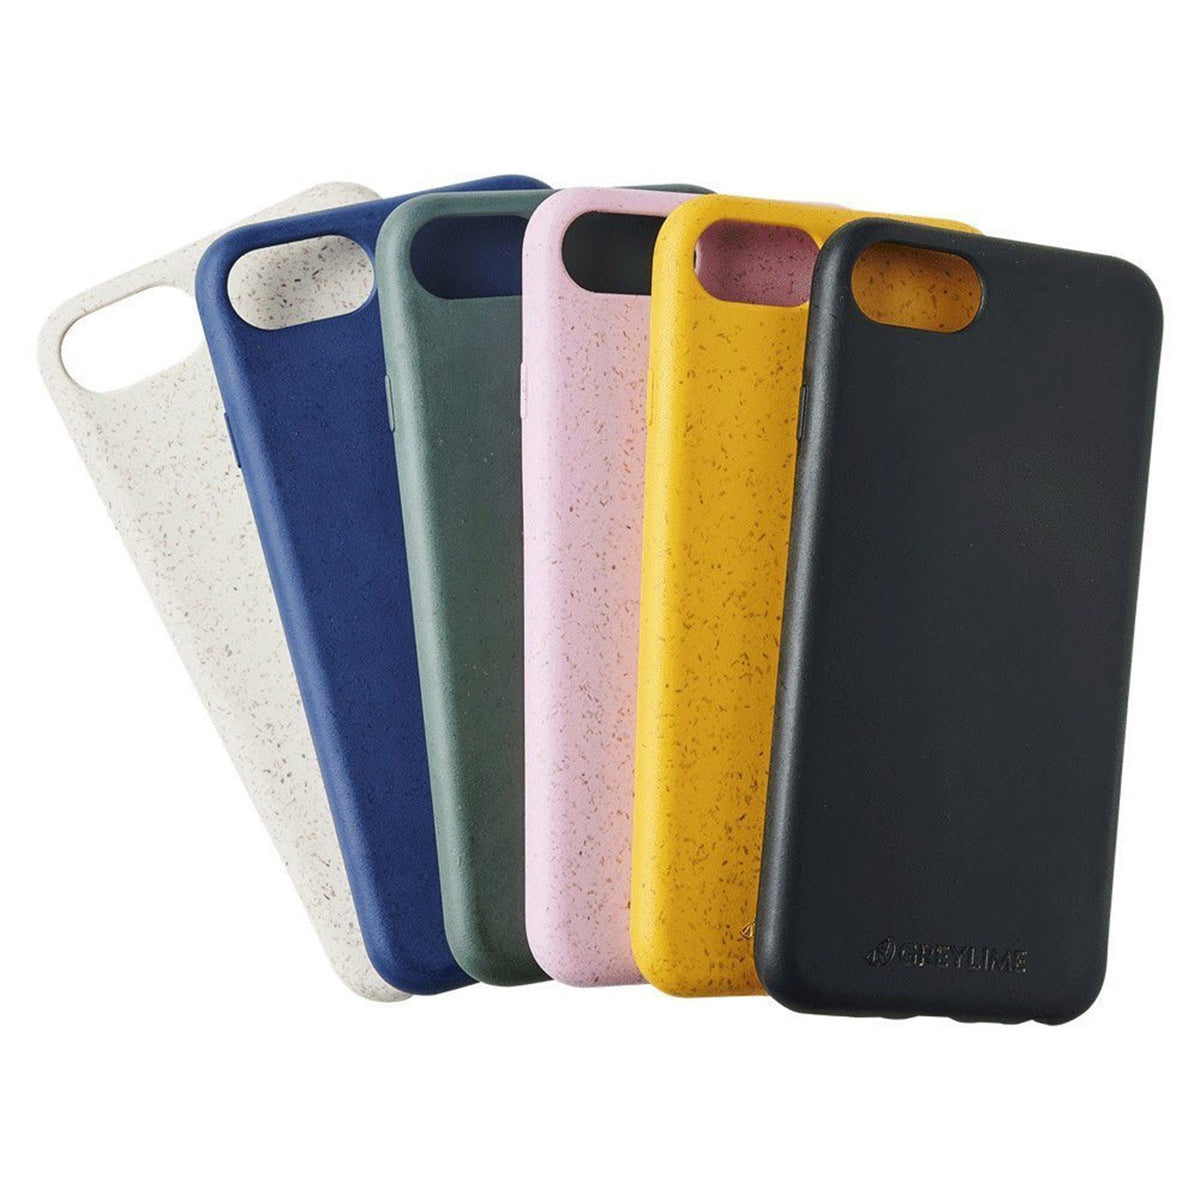 GreyLime-iPhone-6-7-8-SE-Biodegradable-Cover-gruppe.jpg